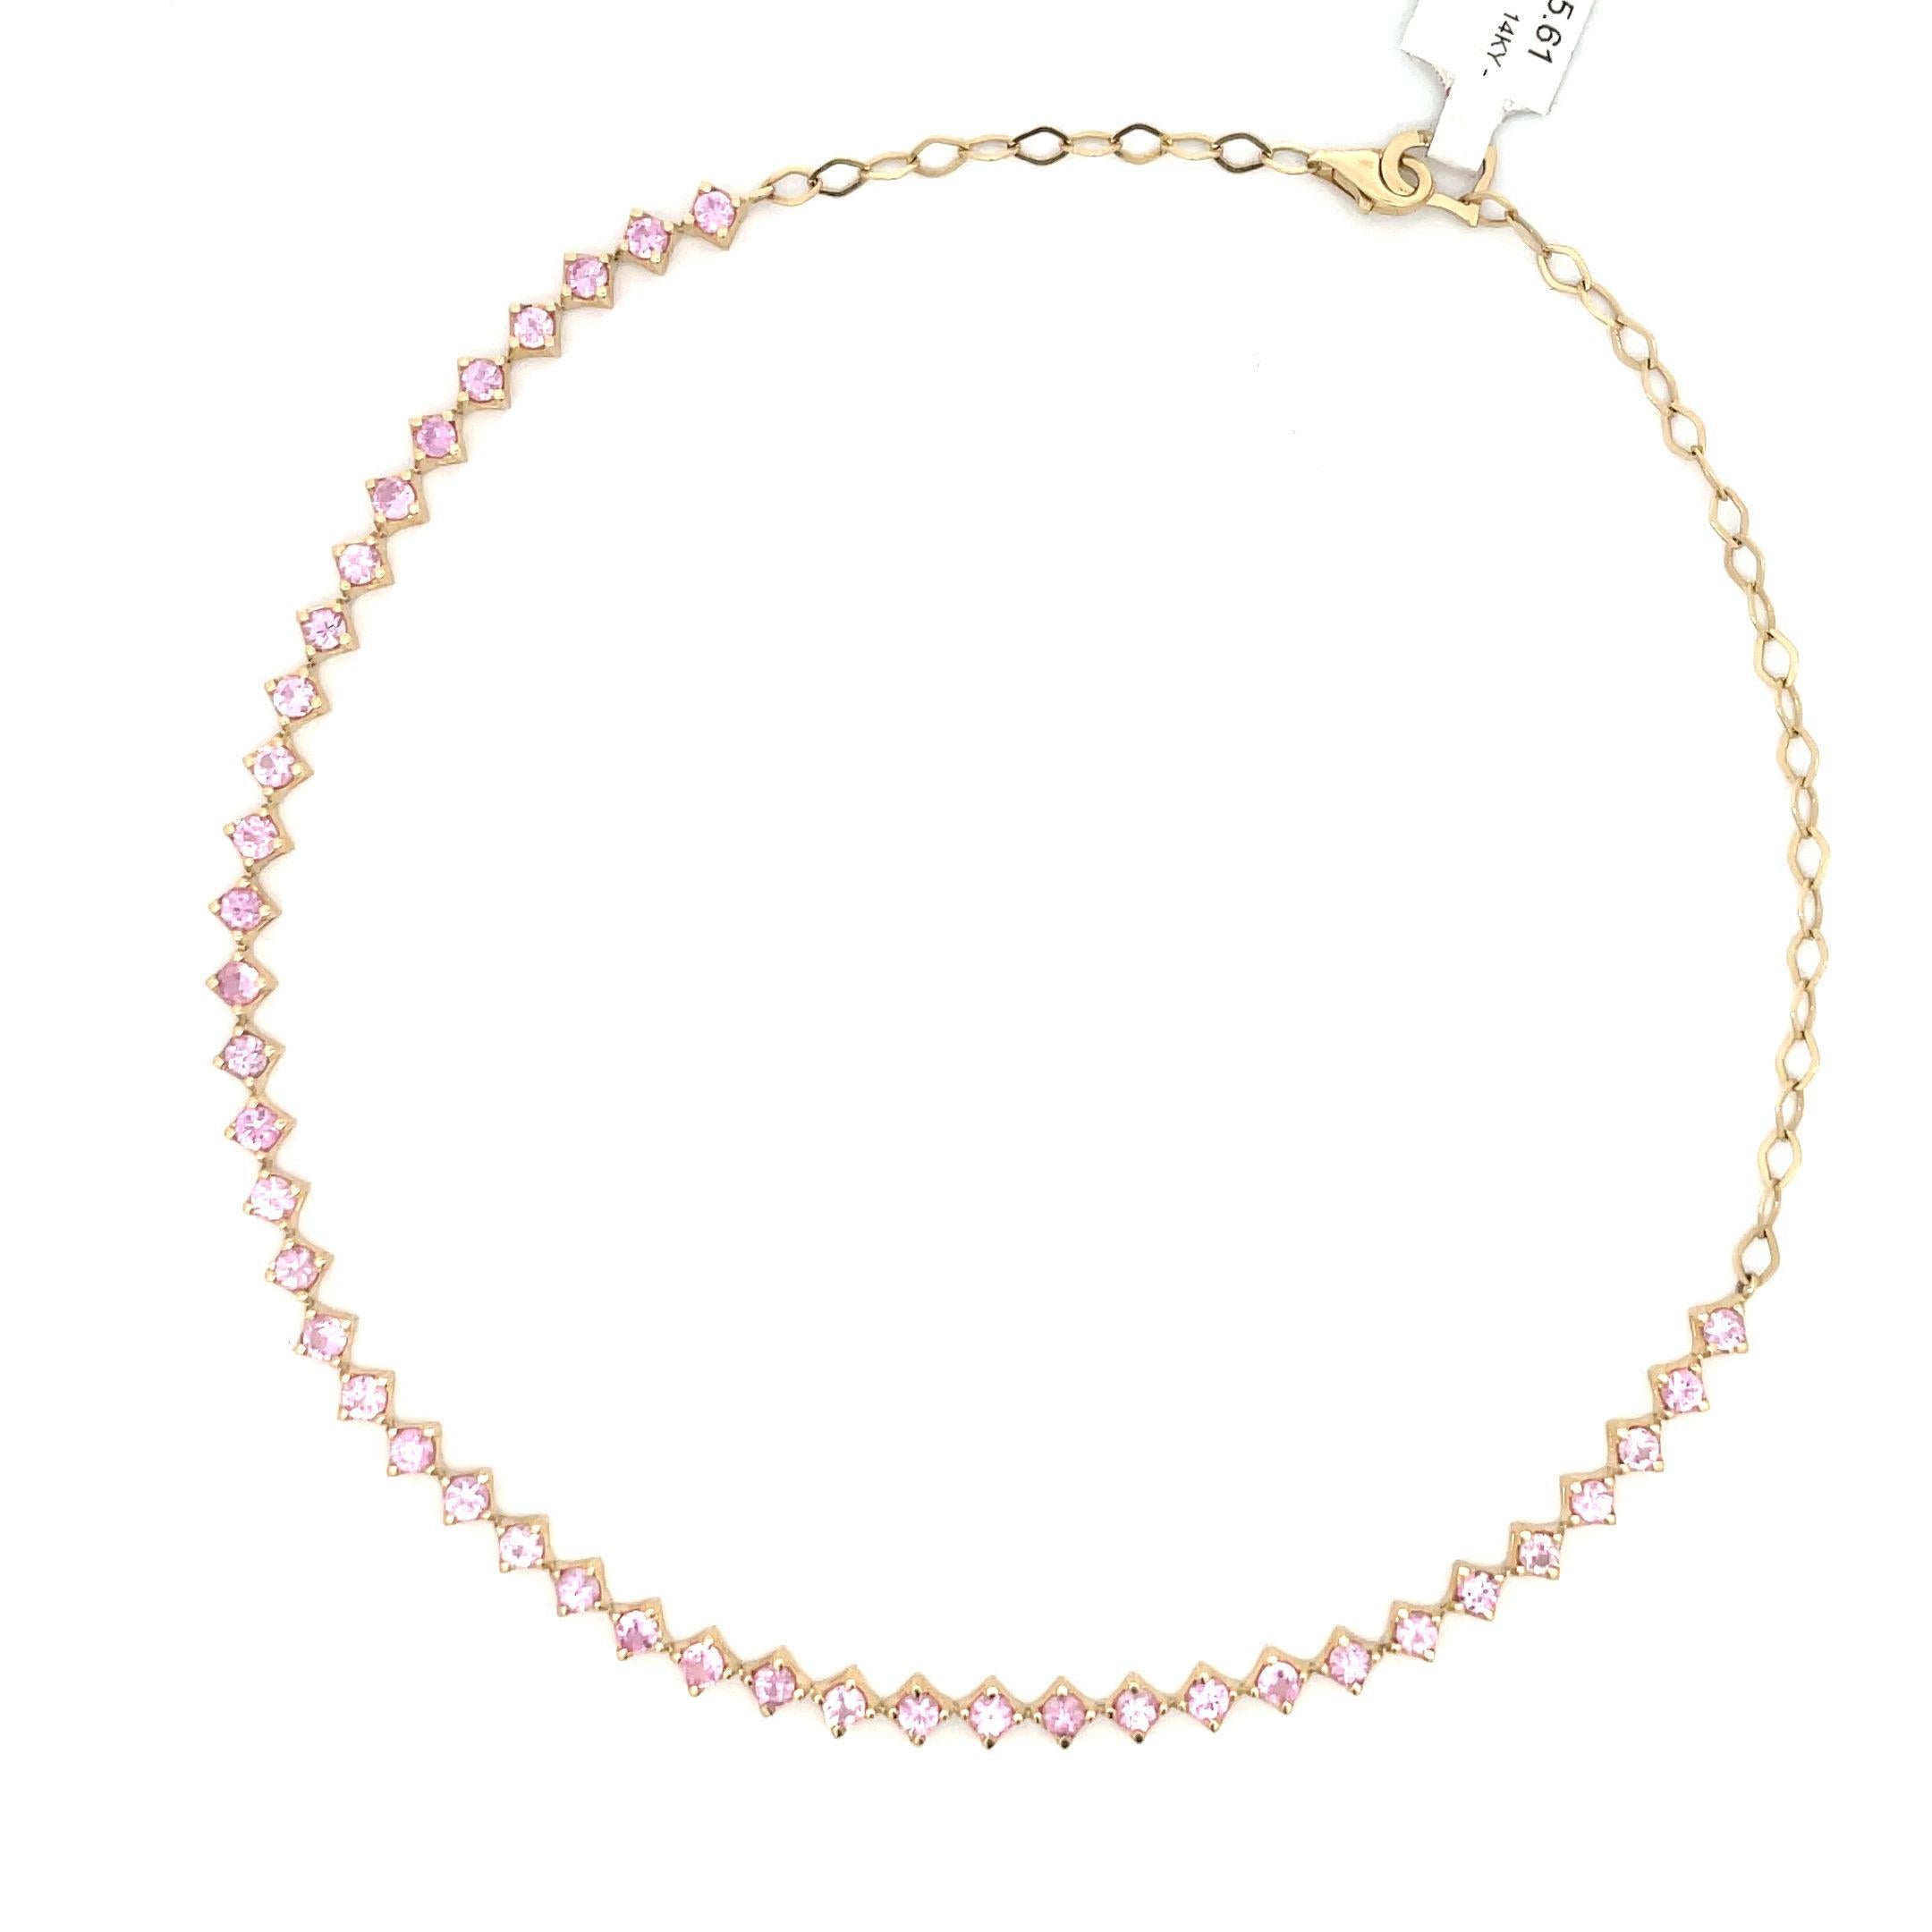 14 Karat Yellow gold choker necklace featuring 44 Pink Sapphire weighing 5.61 Carats. 
Can be worn as a bracelet wrapped twice.

Available in Blue Sapphire & Diamonds
Smaller versions available.
Can add extra links, contact us to discuss

DM for